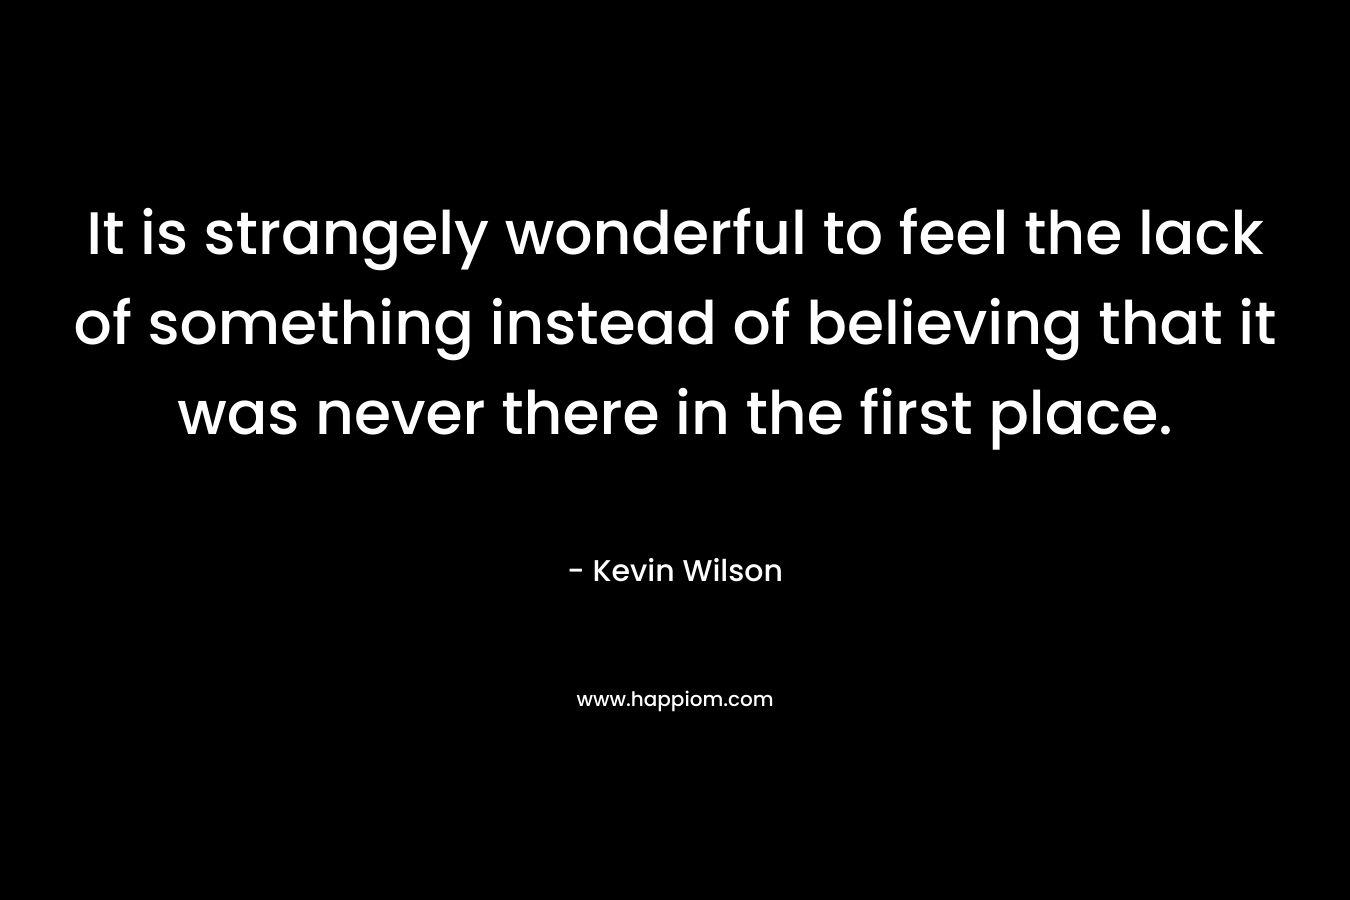 It is strangely wonderful to feel the lack of something instead of believing that it was never there in the first place.